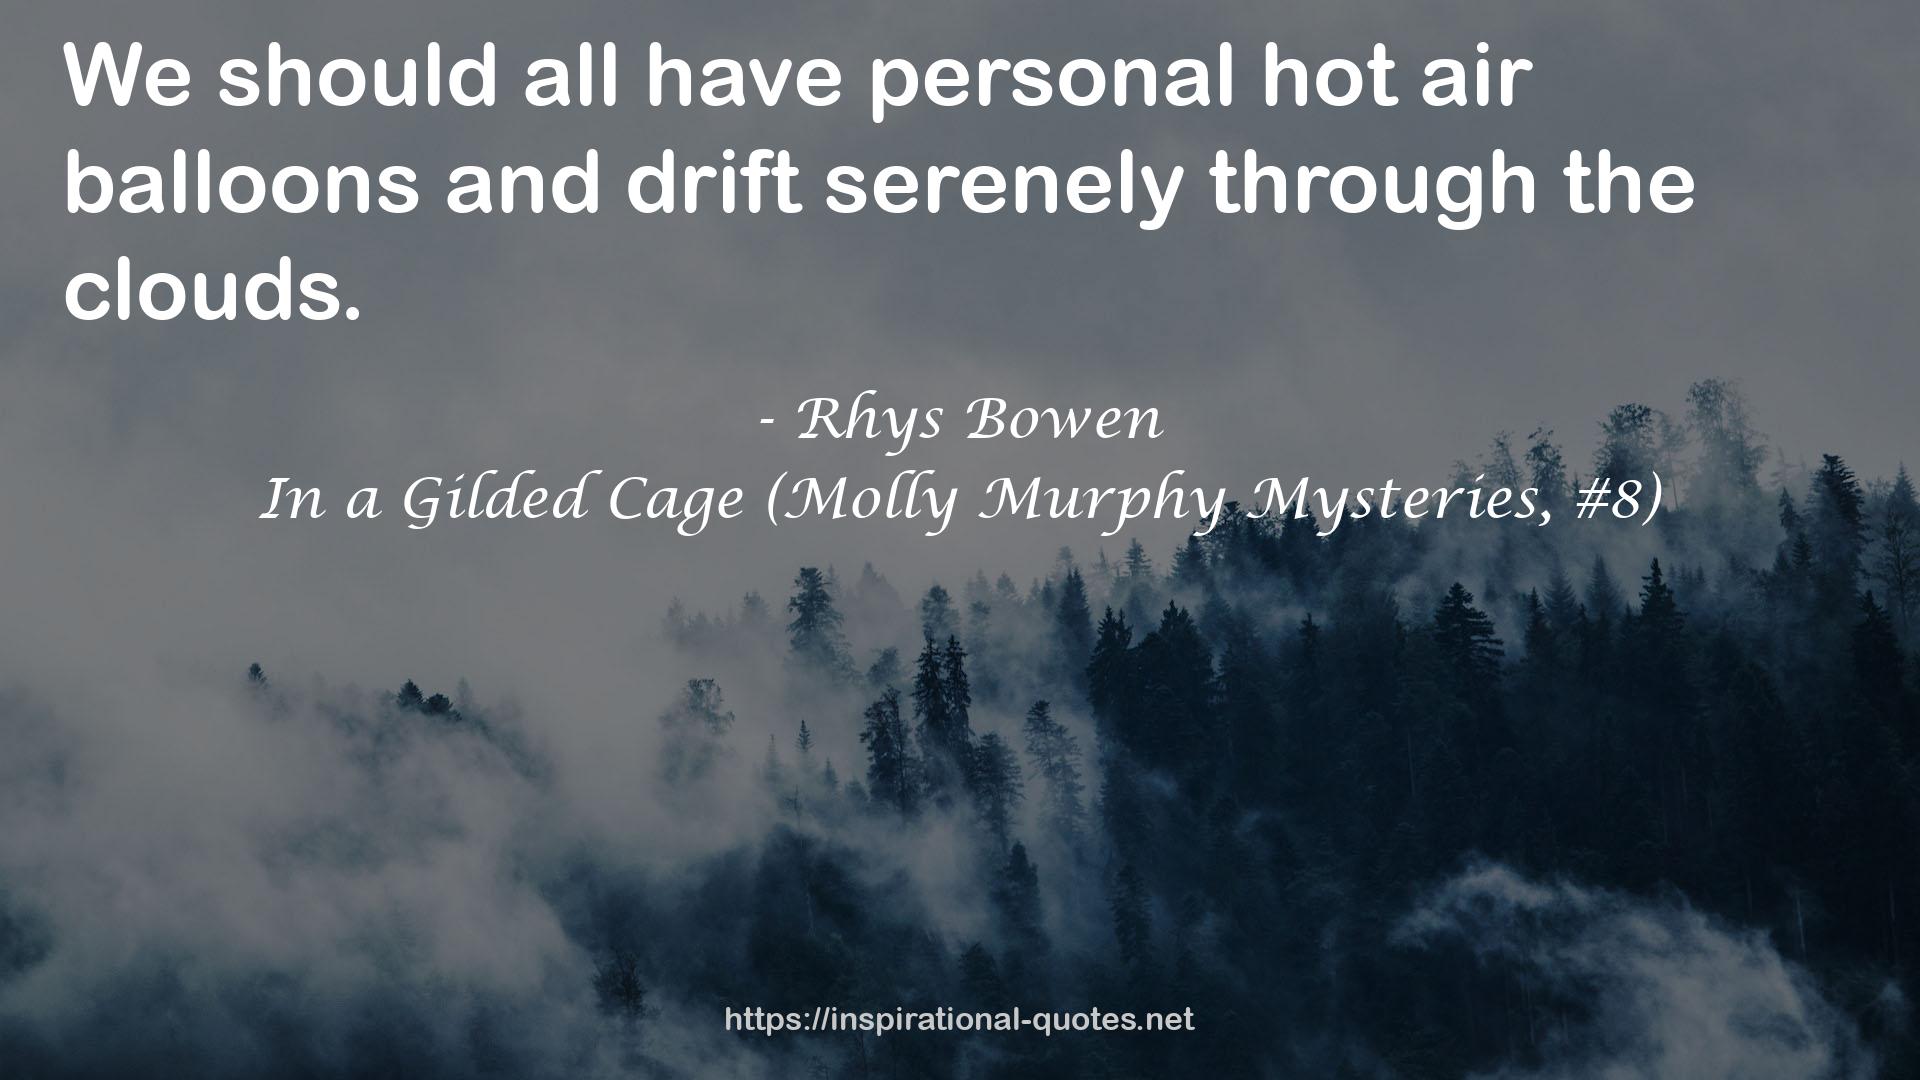 In a Gilded Cage (Molly Murphy Mysteries, #8) QUOTES